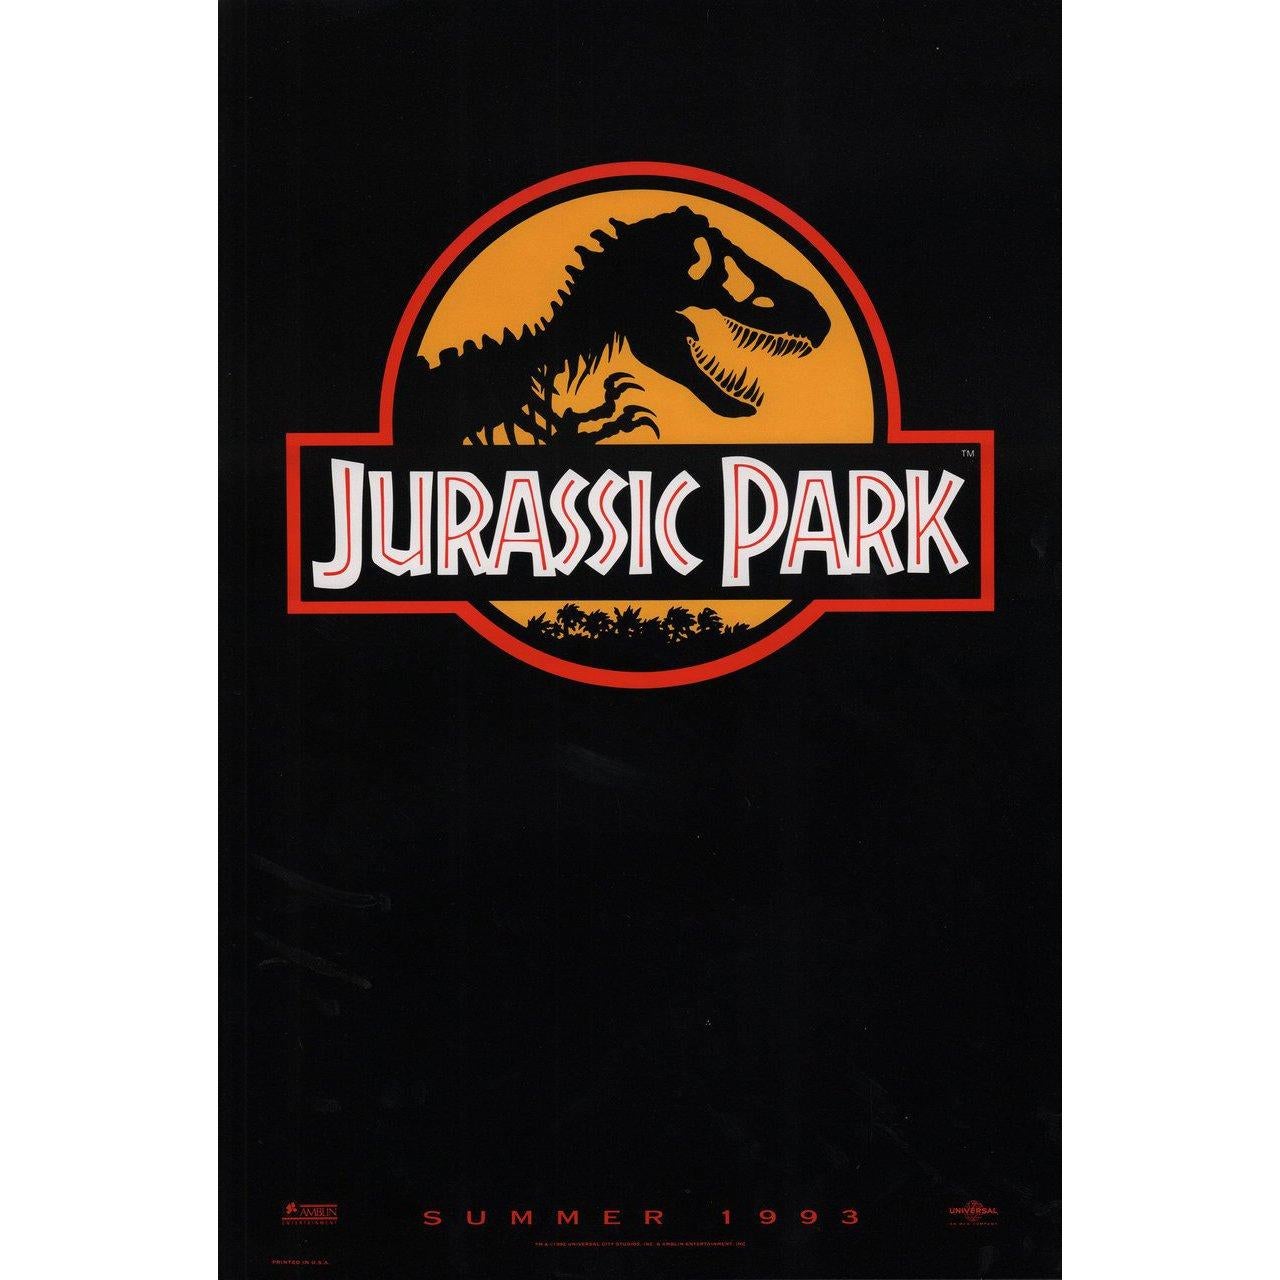 Original 1993 U.S. one sheet poster for the film Jurassic Park directed by Steven Spielberg with Sam Neill / Laura Dern / Jeff Goldblum / Richard Attenborough. Fine condition, rolled. Please note: the size is stated in inches and the actual size can